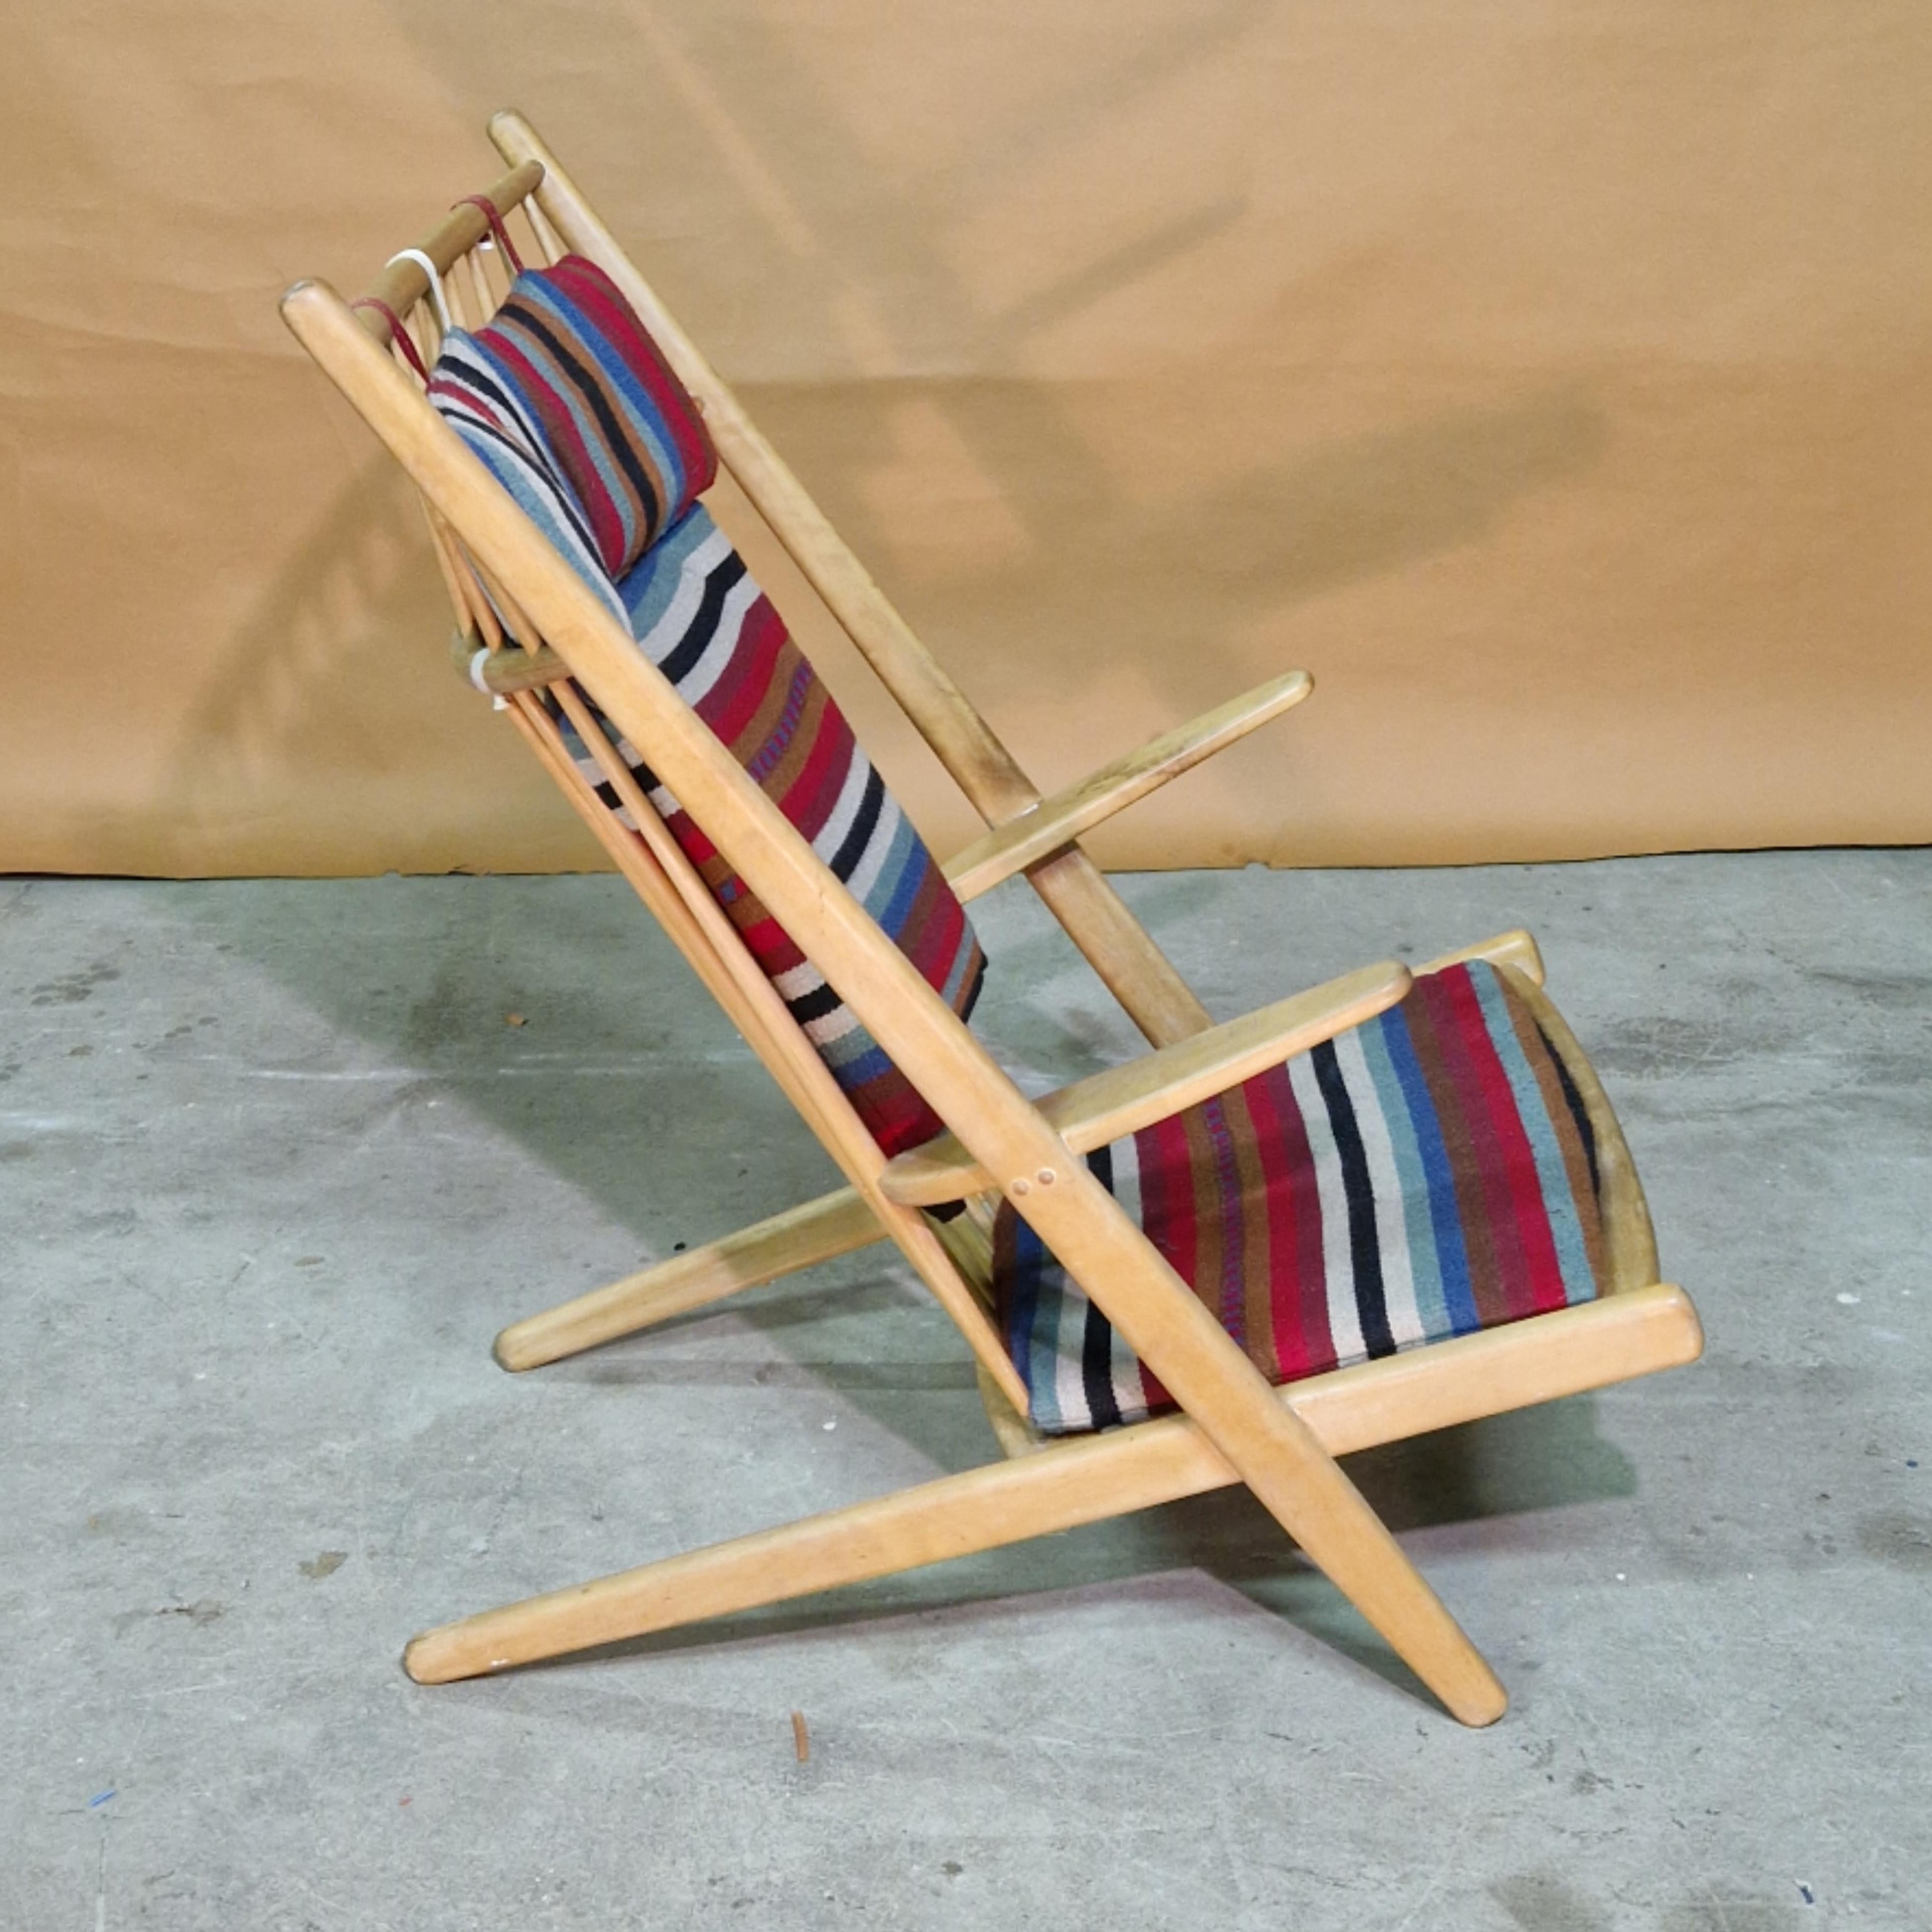 Iconic Goliat lounge chair designed by Paul Volther for Gemla in the 1950s. Made from wood with metal coil spring seat and wood spindle back. It is upholstered in multicolored Bohemian style fabric. 

